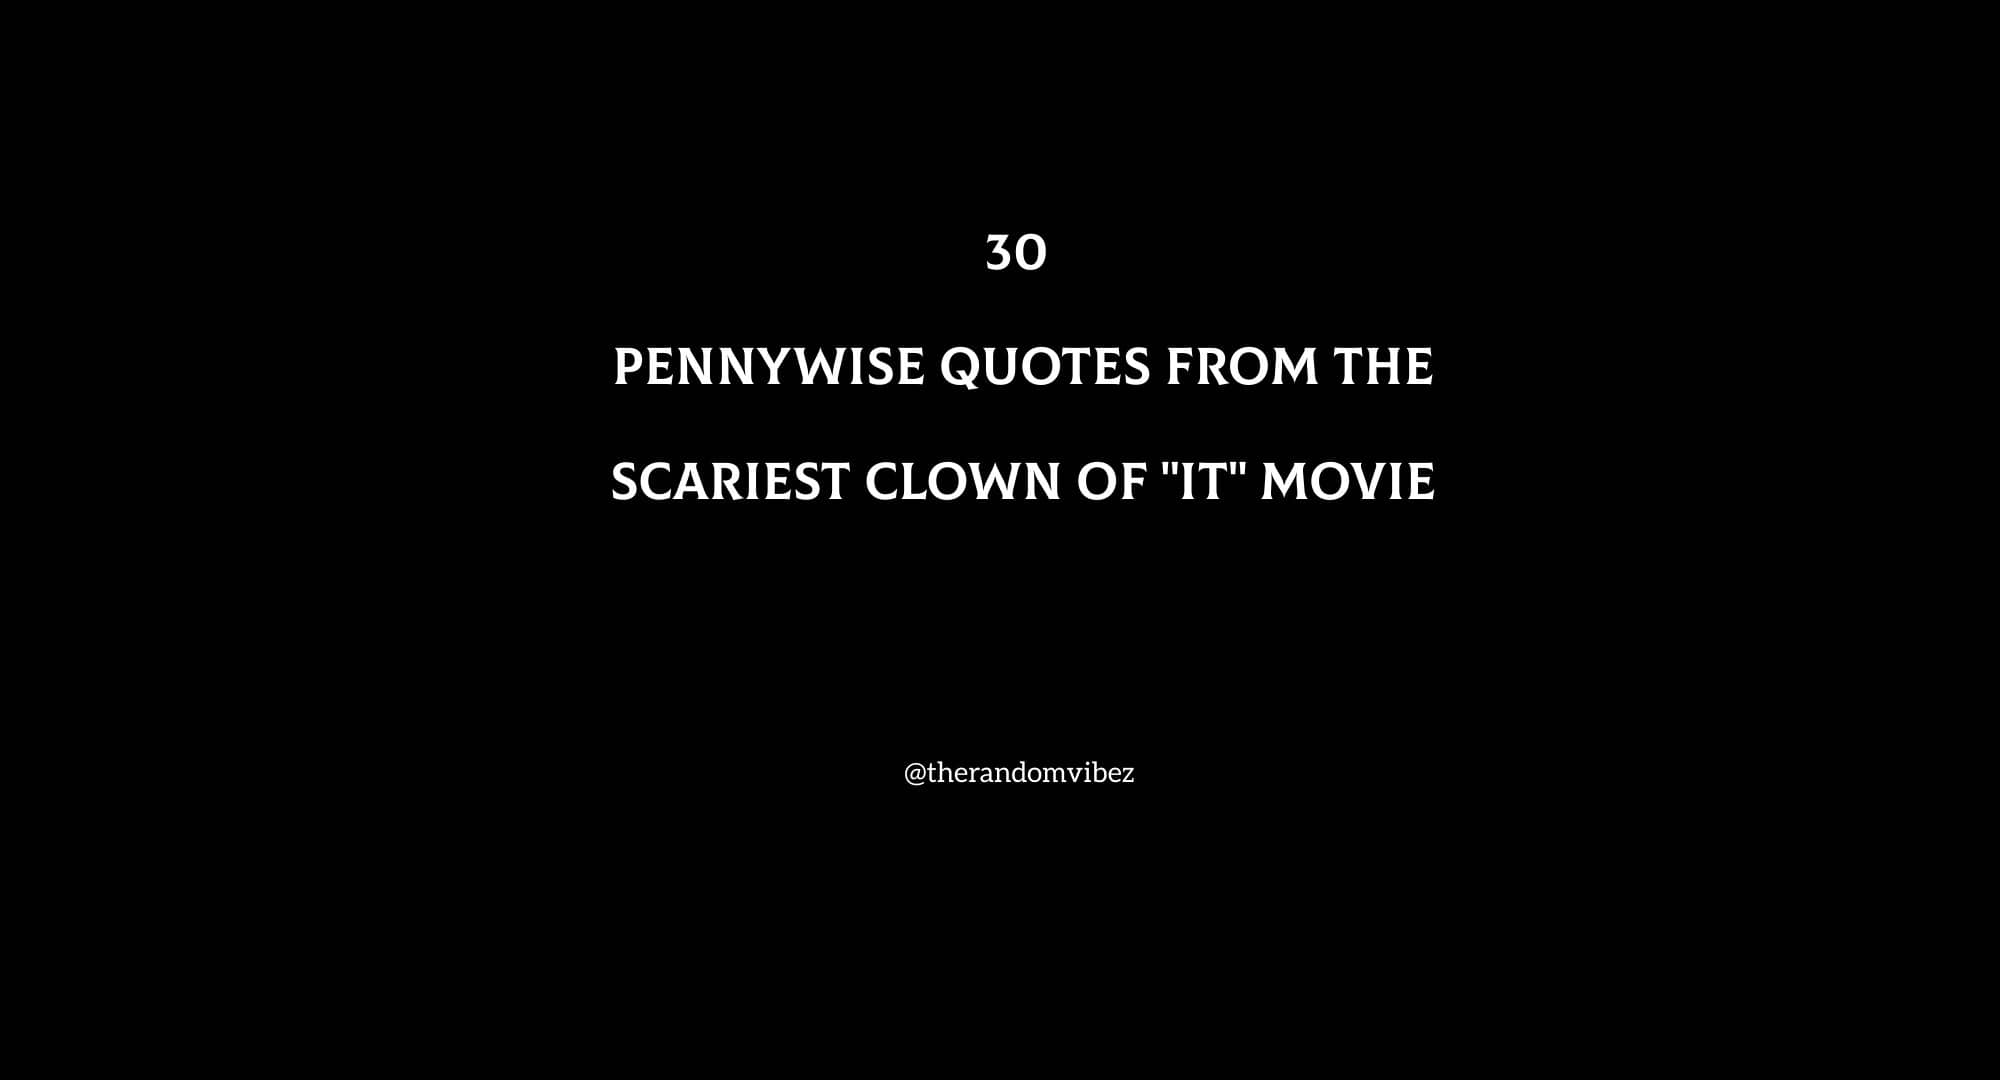 30 Pennywise Quotes From The Scariest Clown Of IT Movie